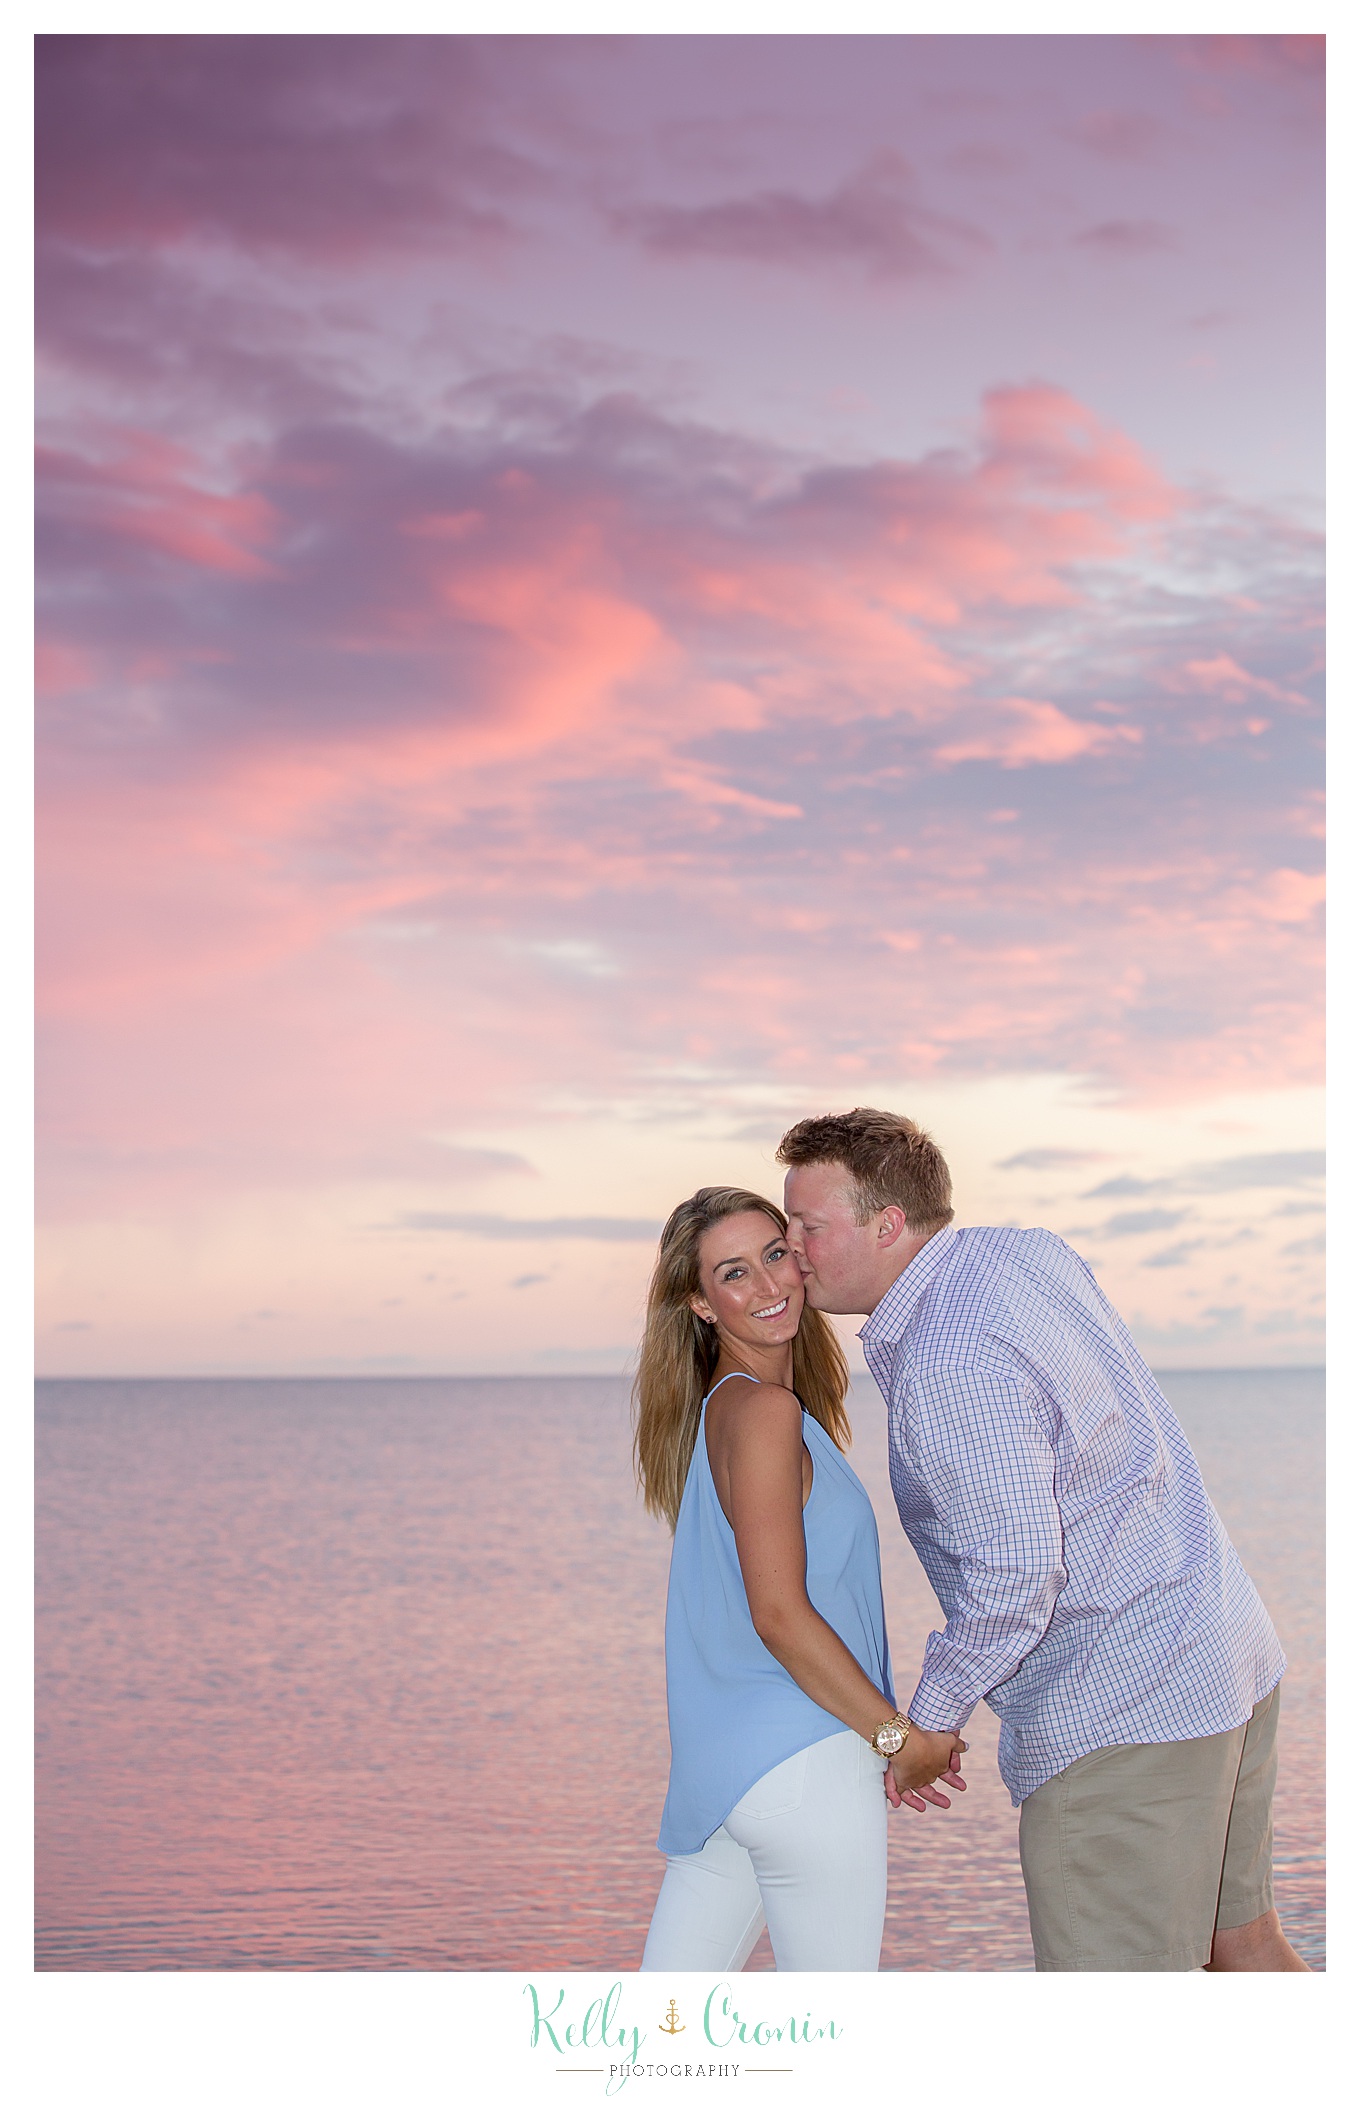 A man kisses his fiance in front of a sunset.